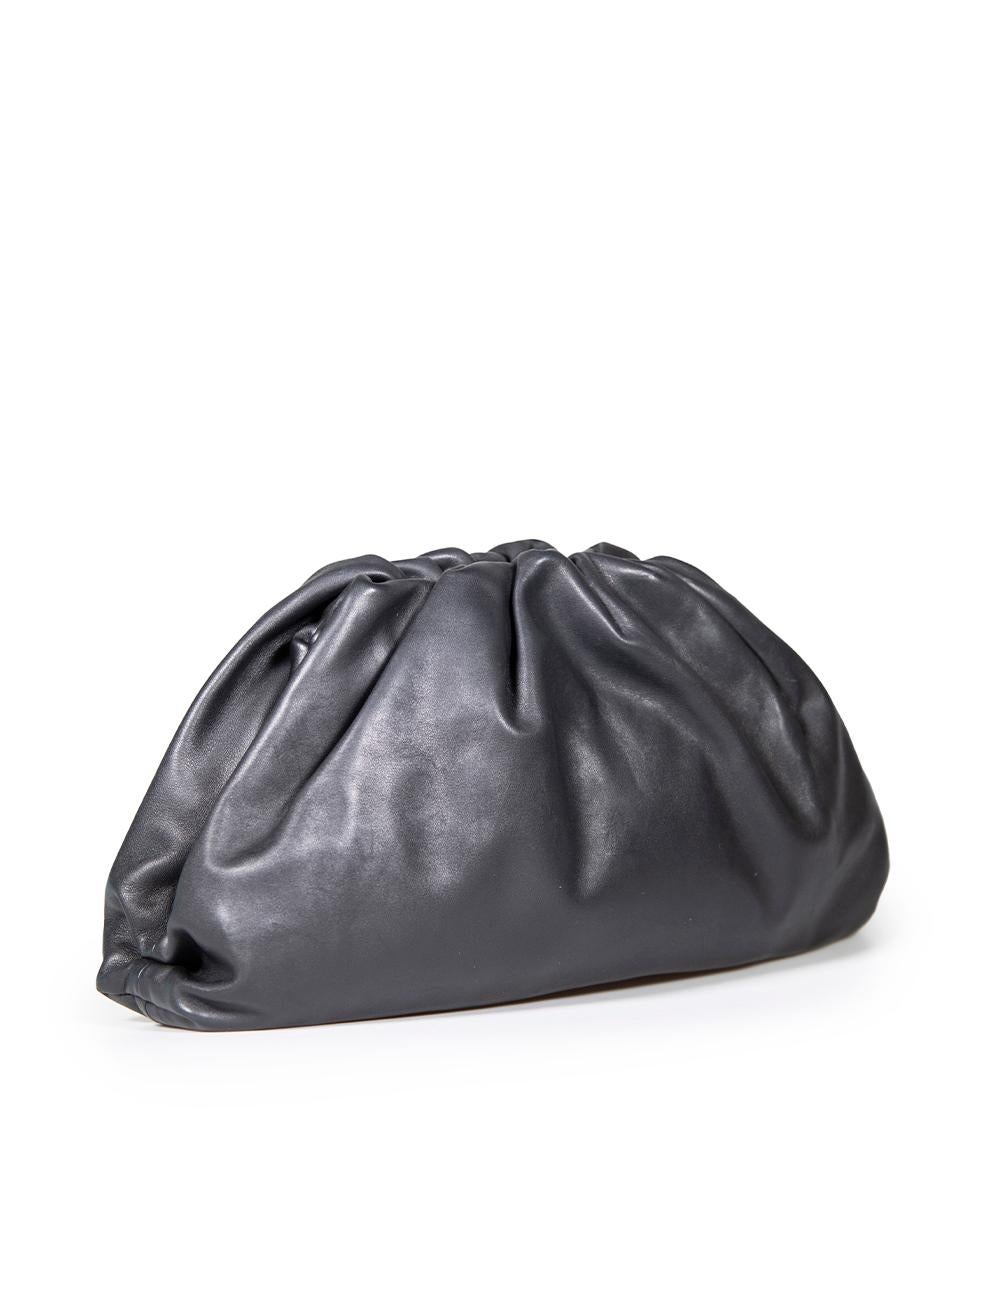 CONDITION is Good. Minor wear to bag is evident. Light wear to the leather surface which shows light scuff marks throughout, particularly inside the clasp of this used Bottega Veneta designer resale item.
 
 
 
 Details
 
 
 Model: Pouch
 
 Black
 
